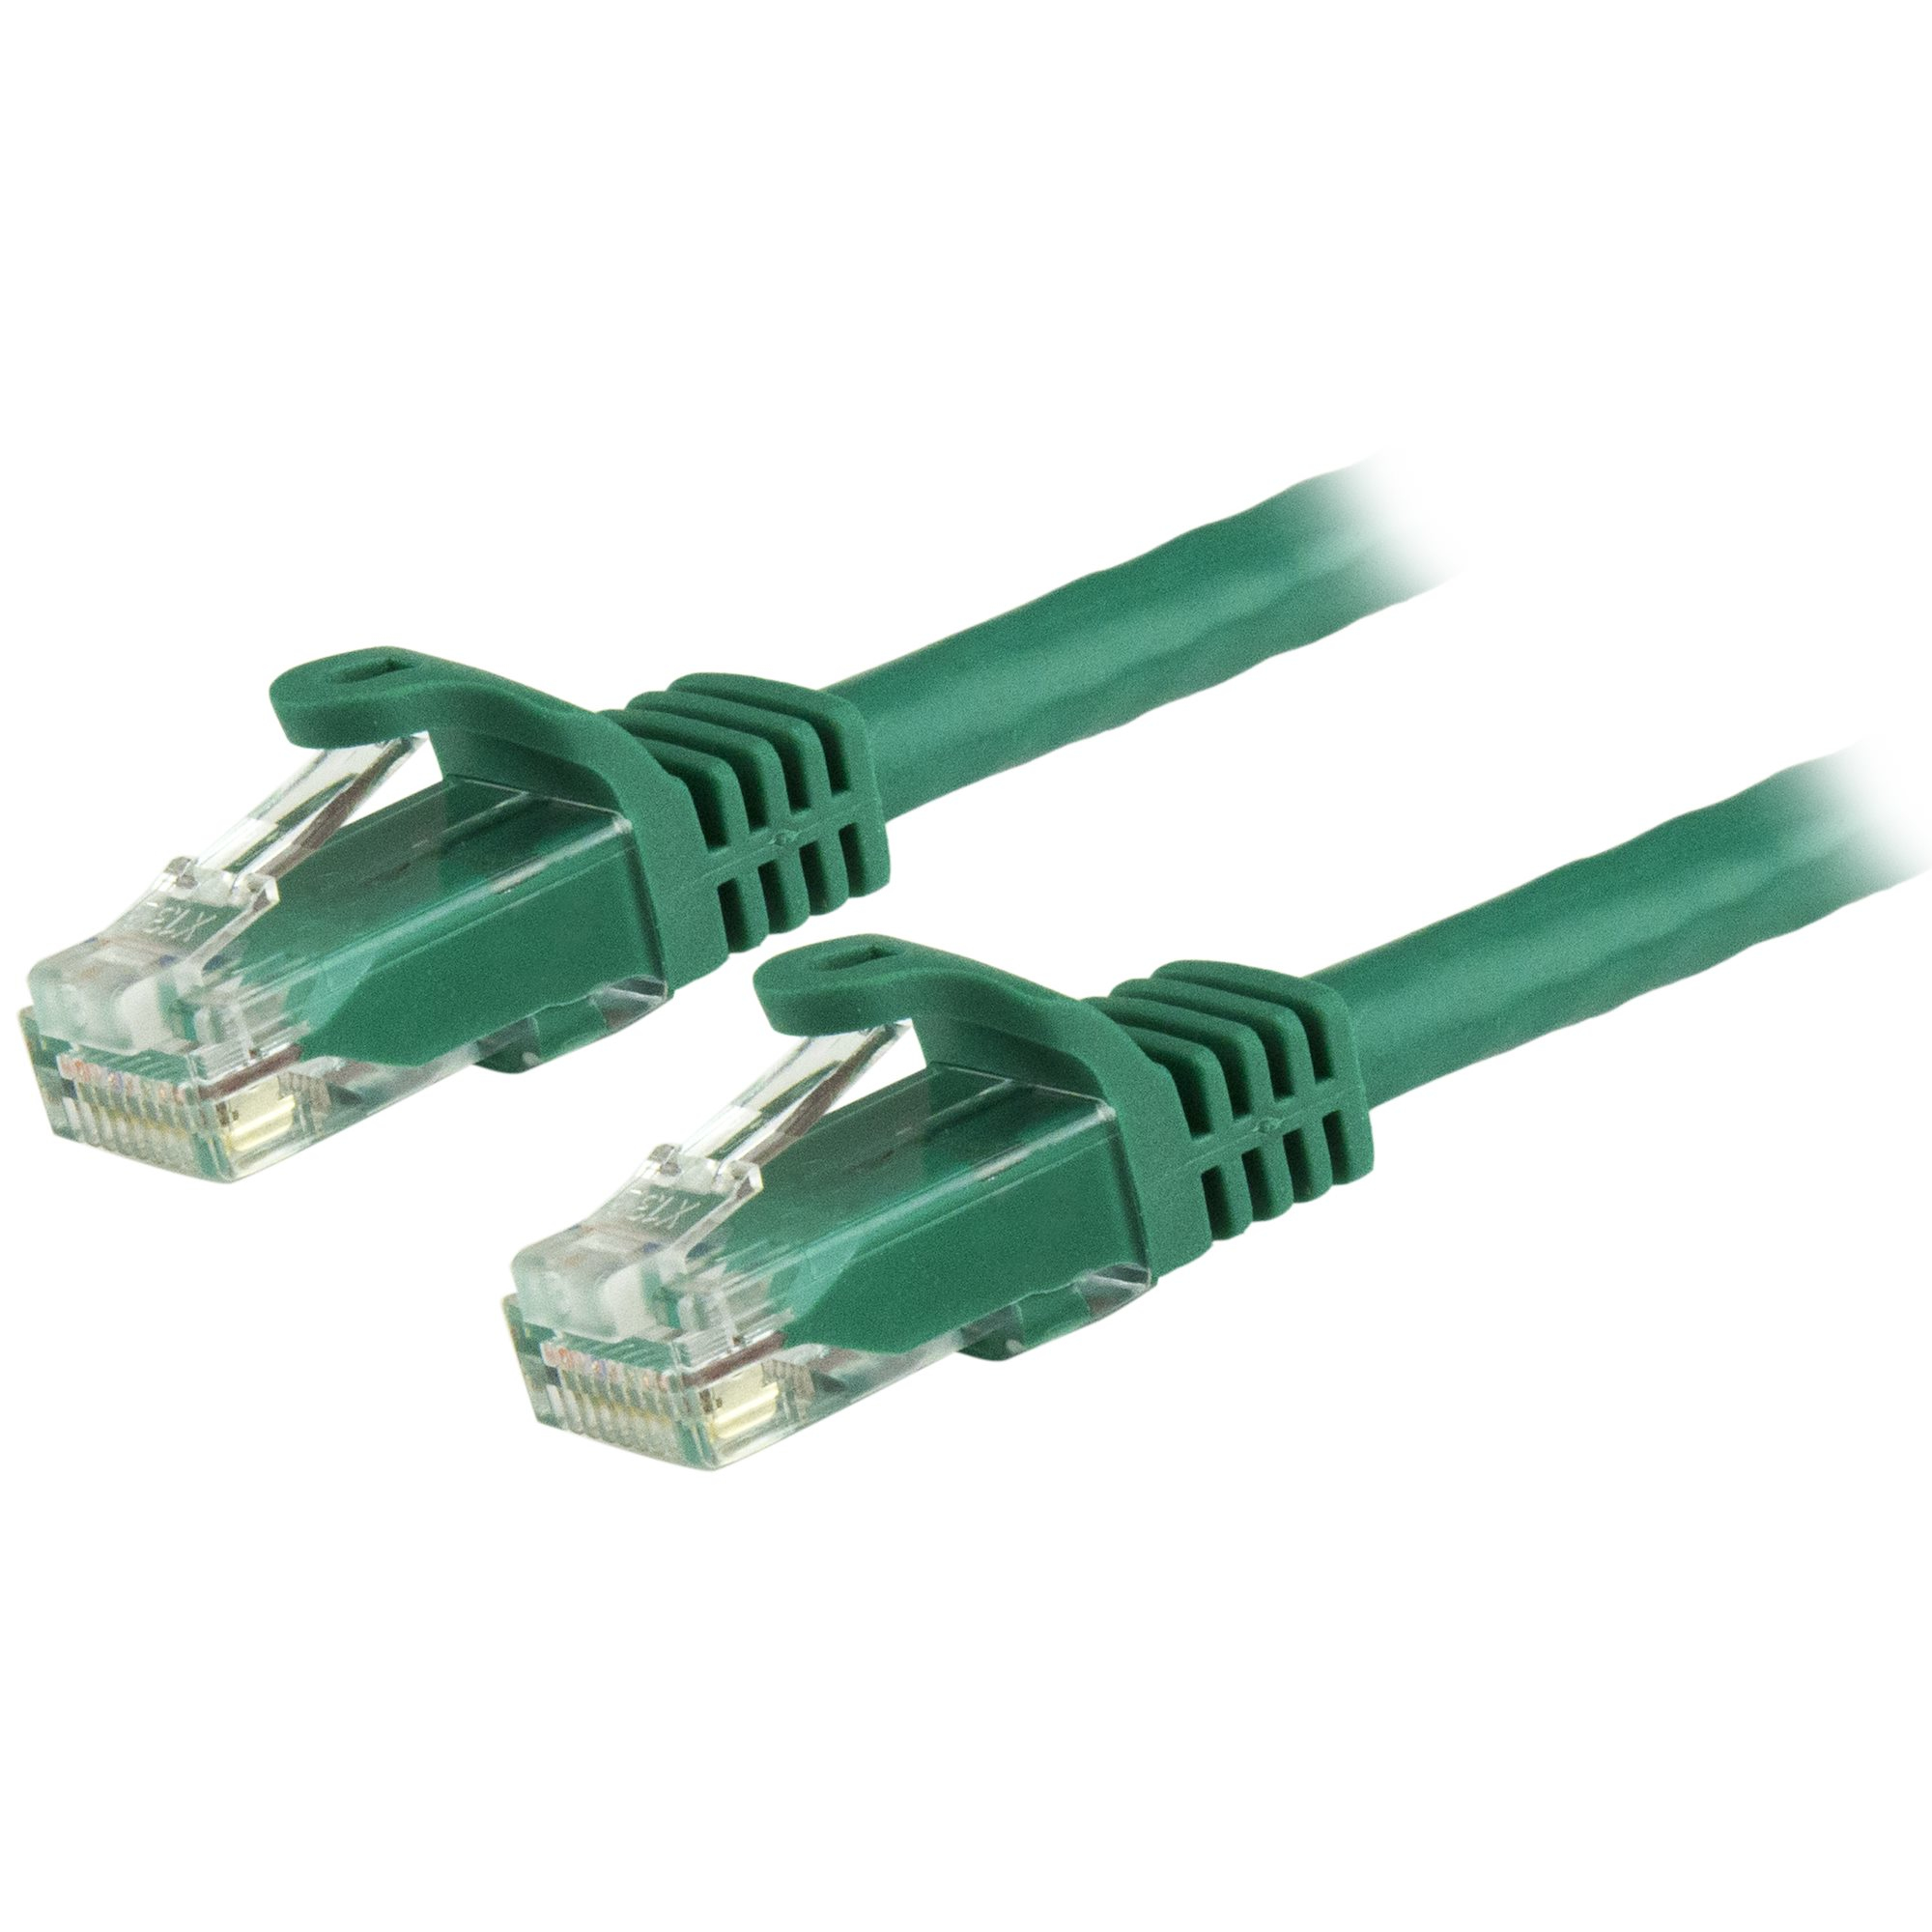 StarTech.com 7.5m CAT6 Ethernet Cable, 10 Gigabit Snagless RJ45 650MHz 100W PoE Patch Cord, CAT 6 10GbE UTP Network Cable w/Strain Relief, Green, Fluke Tested/Wiring is UL Certified/TIA - Category 6 - 24AWG (N6PATC750CMGN)